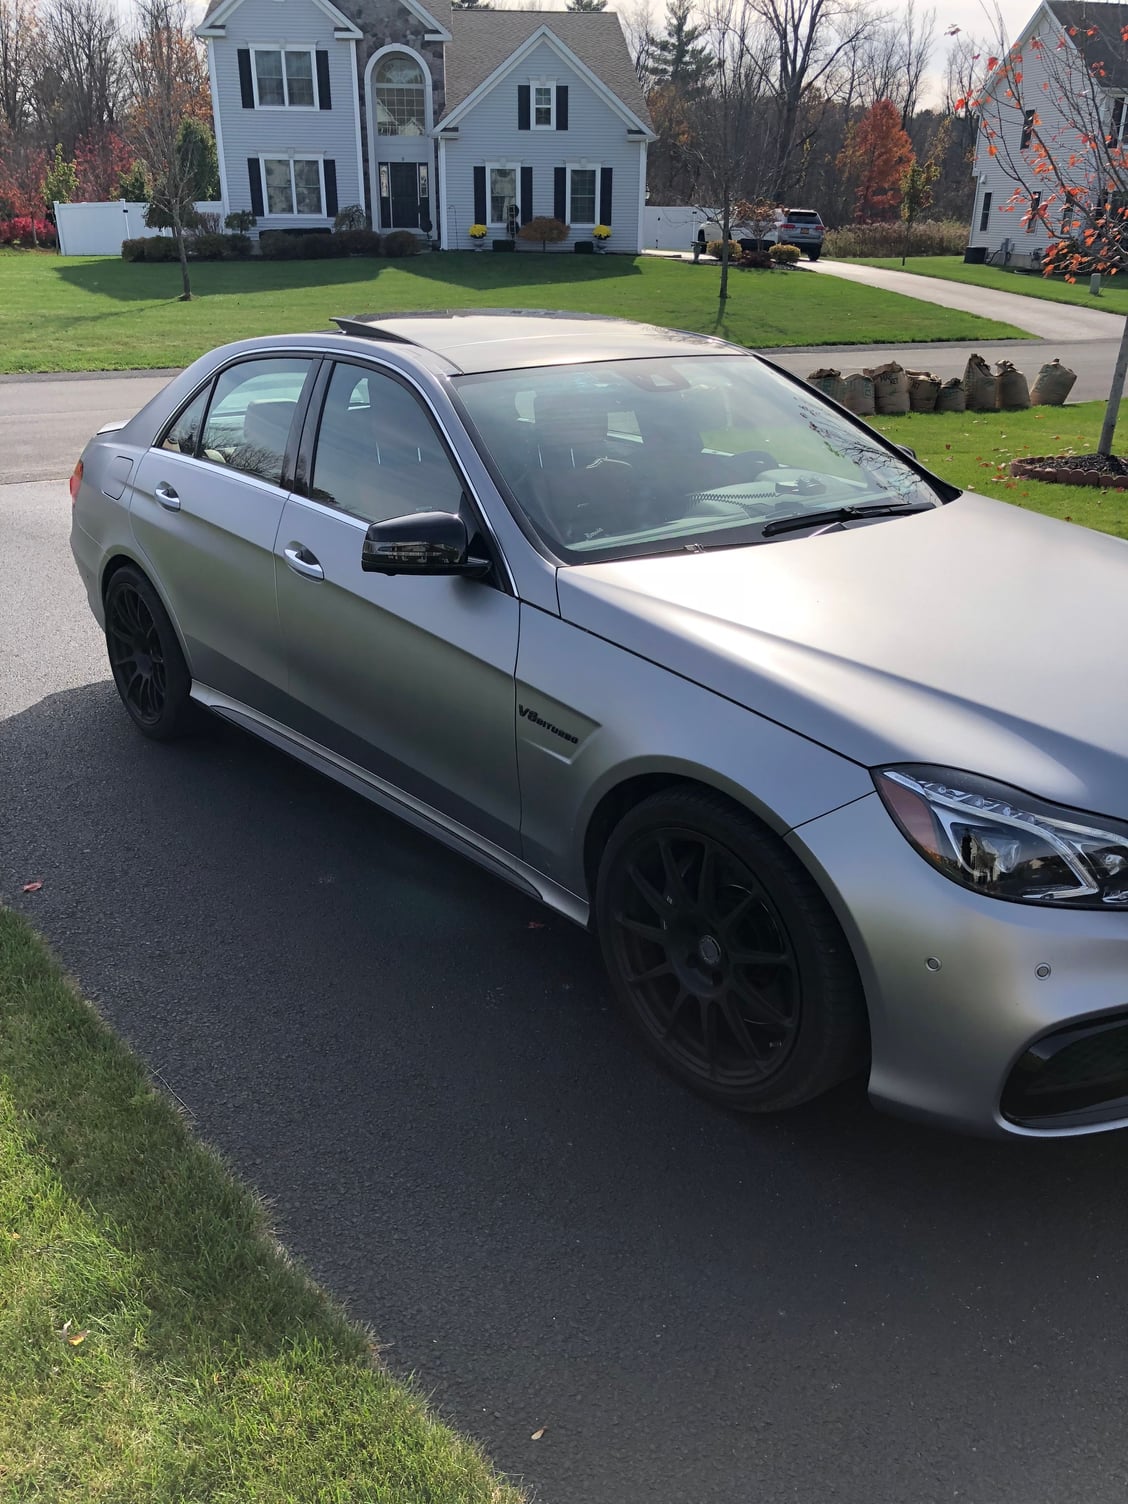 2014 Mercedes-Benz E63 AMG - E63 AMG 1 of 1 high spec - Used - VIN WDDHF9CB8EA976229 - 38,500 Miles - 8 cyl - AWD - Automatic - Sedan - Other - Clifton Park, NY 12065, United States